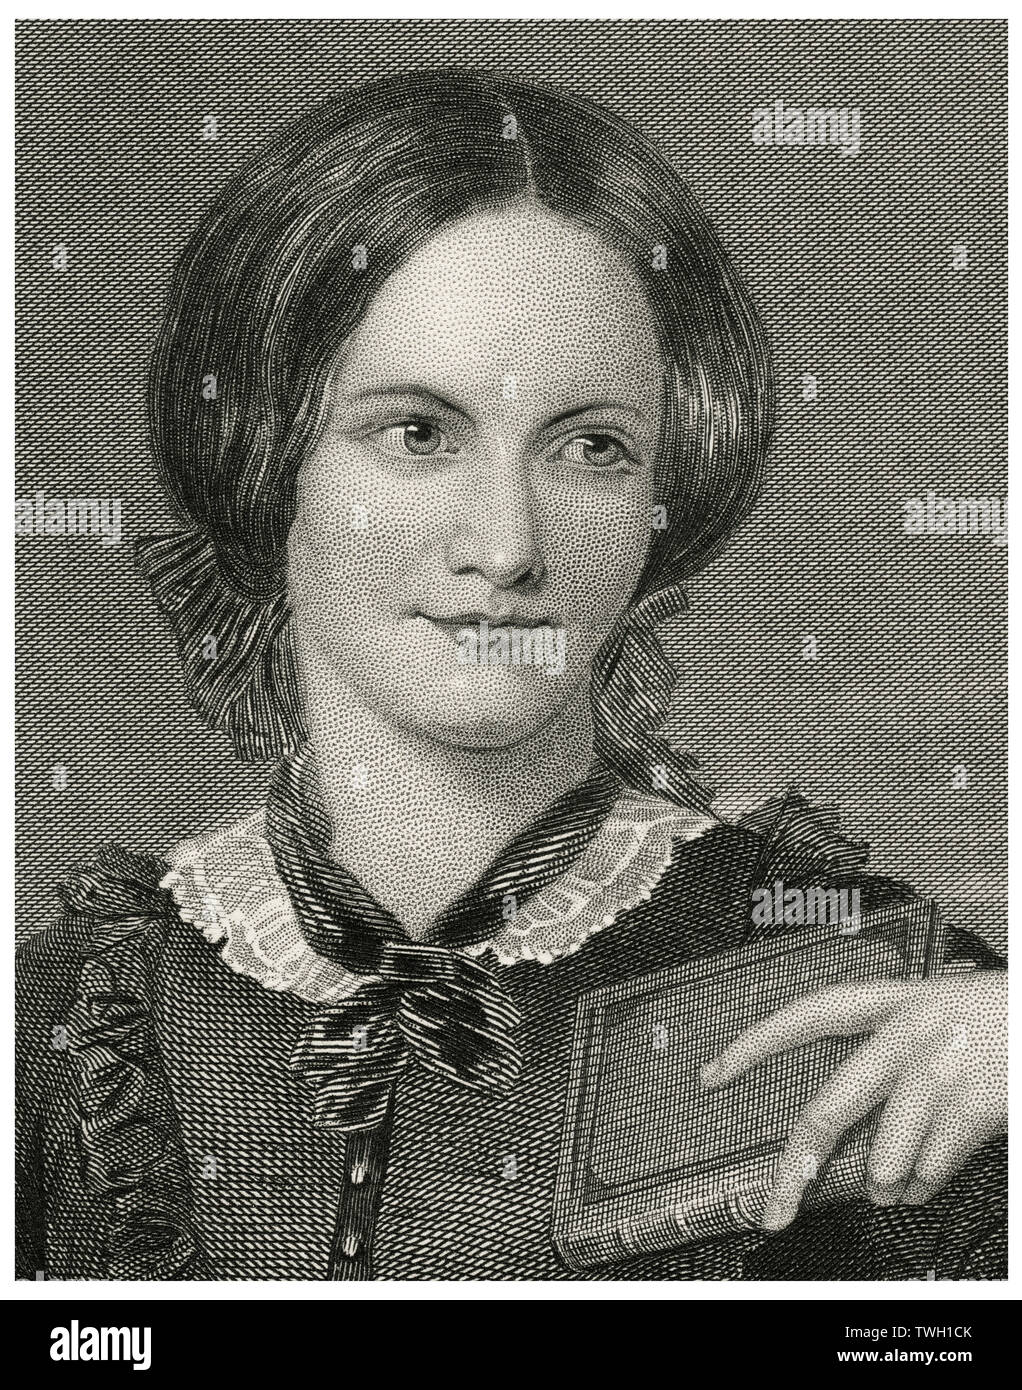 Charlotte Bronte (1816-55), English Novelist and Poet, Head and Shoulders Portrait, Steel Engraving, Portrait Gallery of Eminent Men and Women of Europe and America by Evert A. Duyckinck, Published by Henry J. Johnson, Johnson, Wilson & Company, New York, 1873 Stock Photo